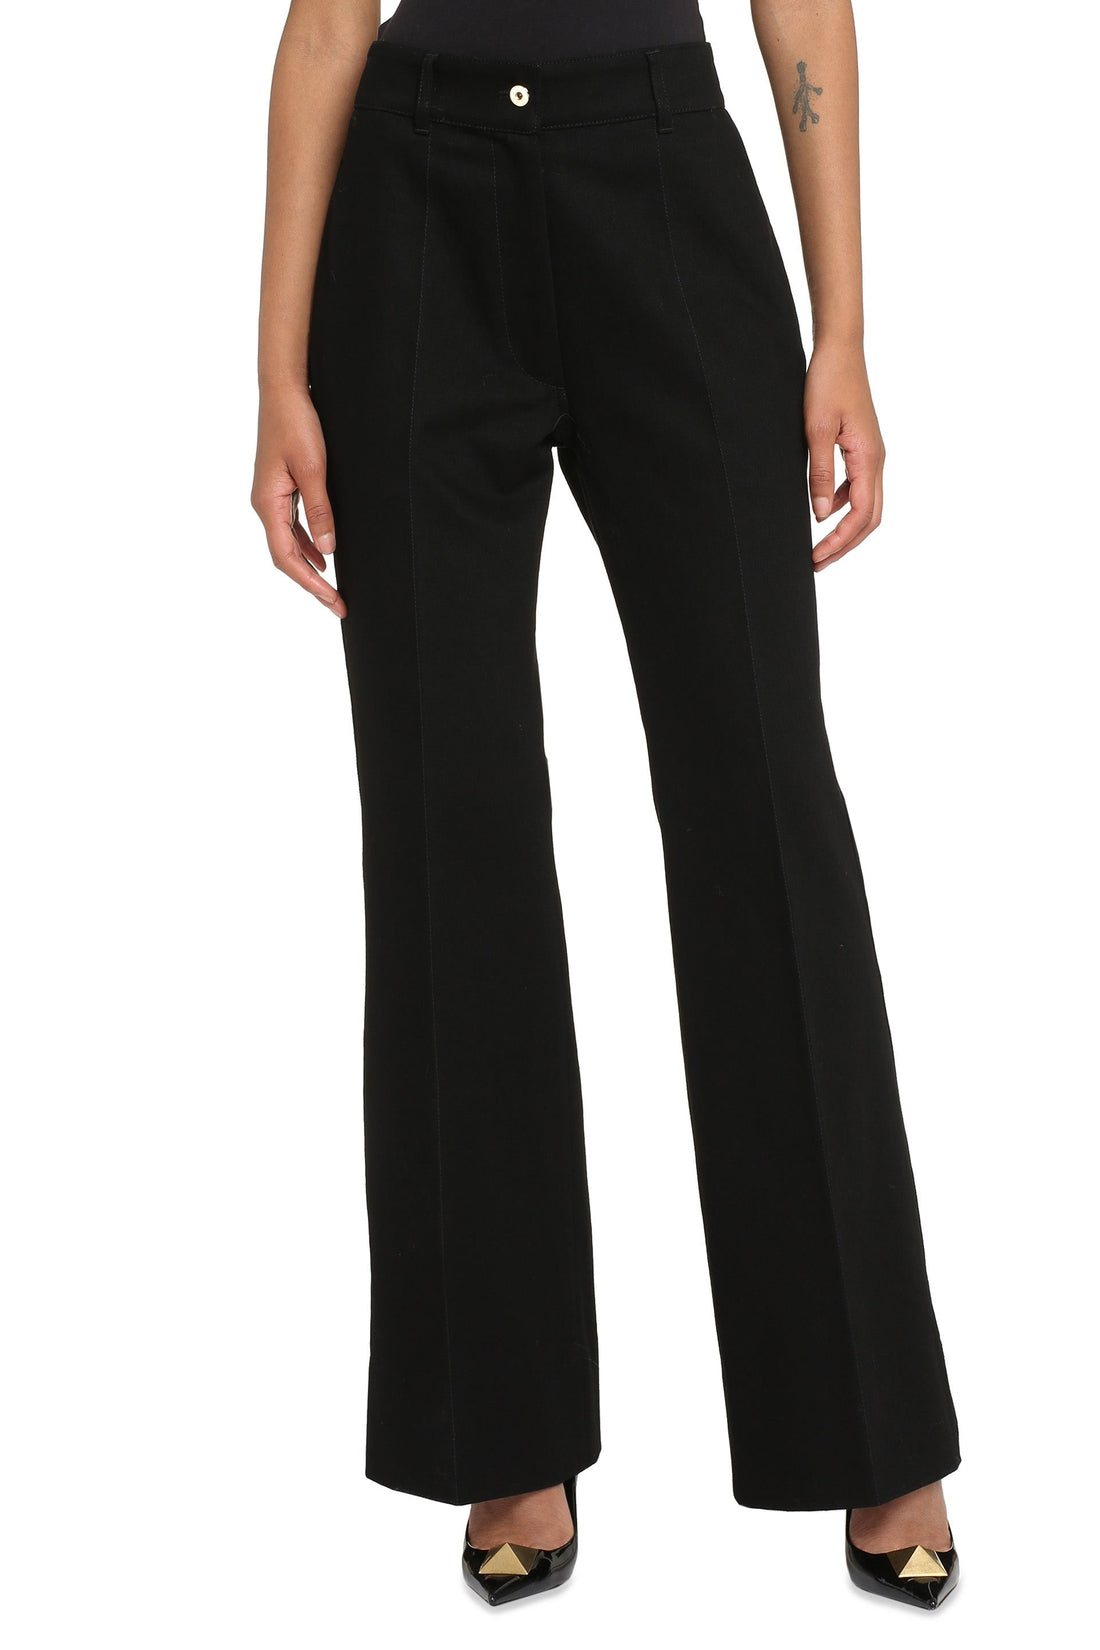 Patou-OUTLET-SALE-High-rise flared jeans-ARCHIVIST